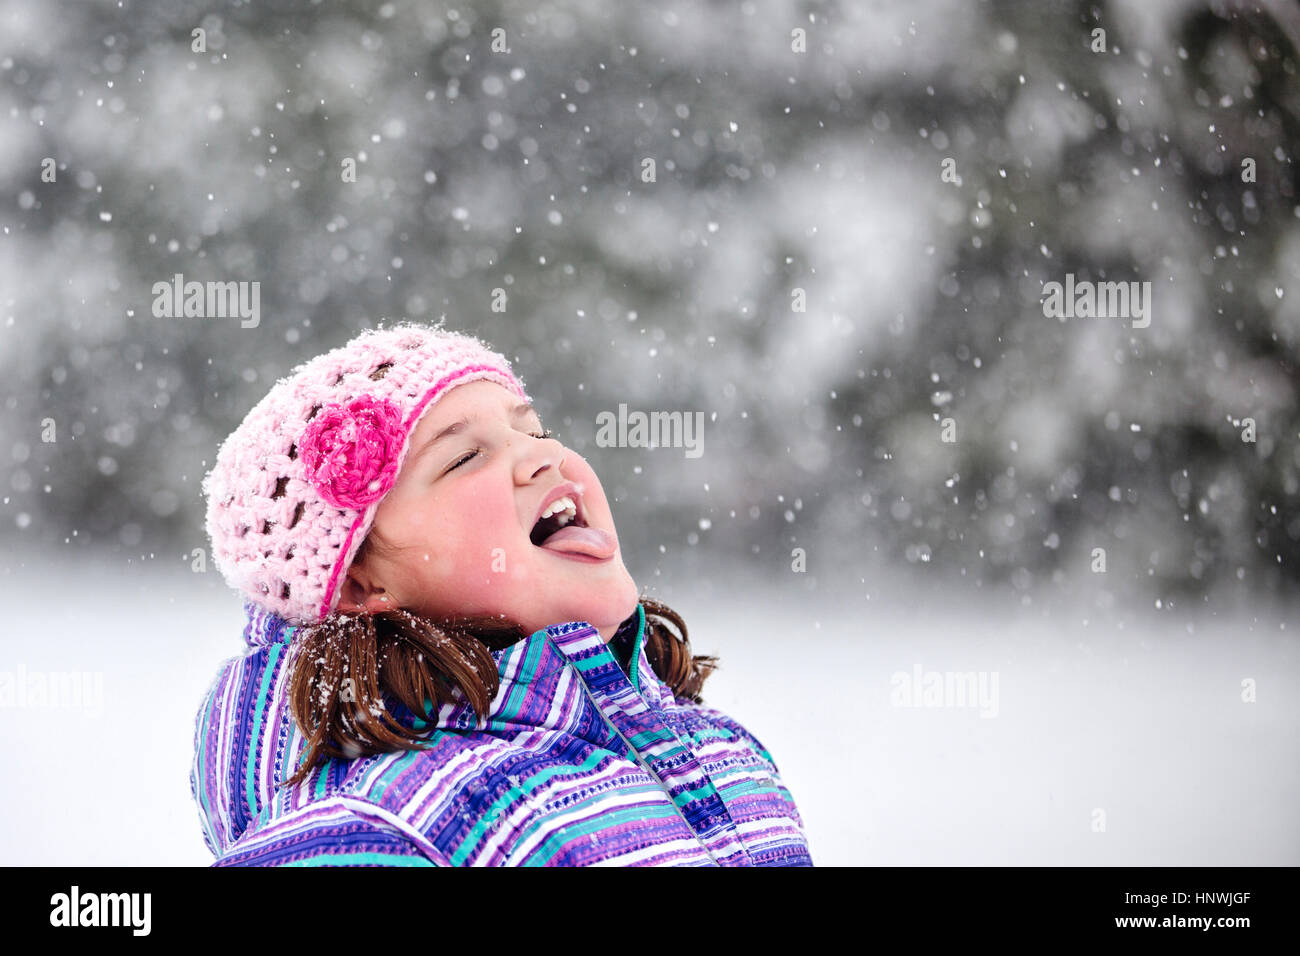 Girl catching snowflake on her tongue Stock Photo